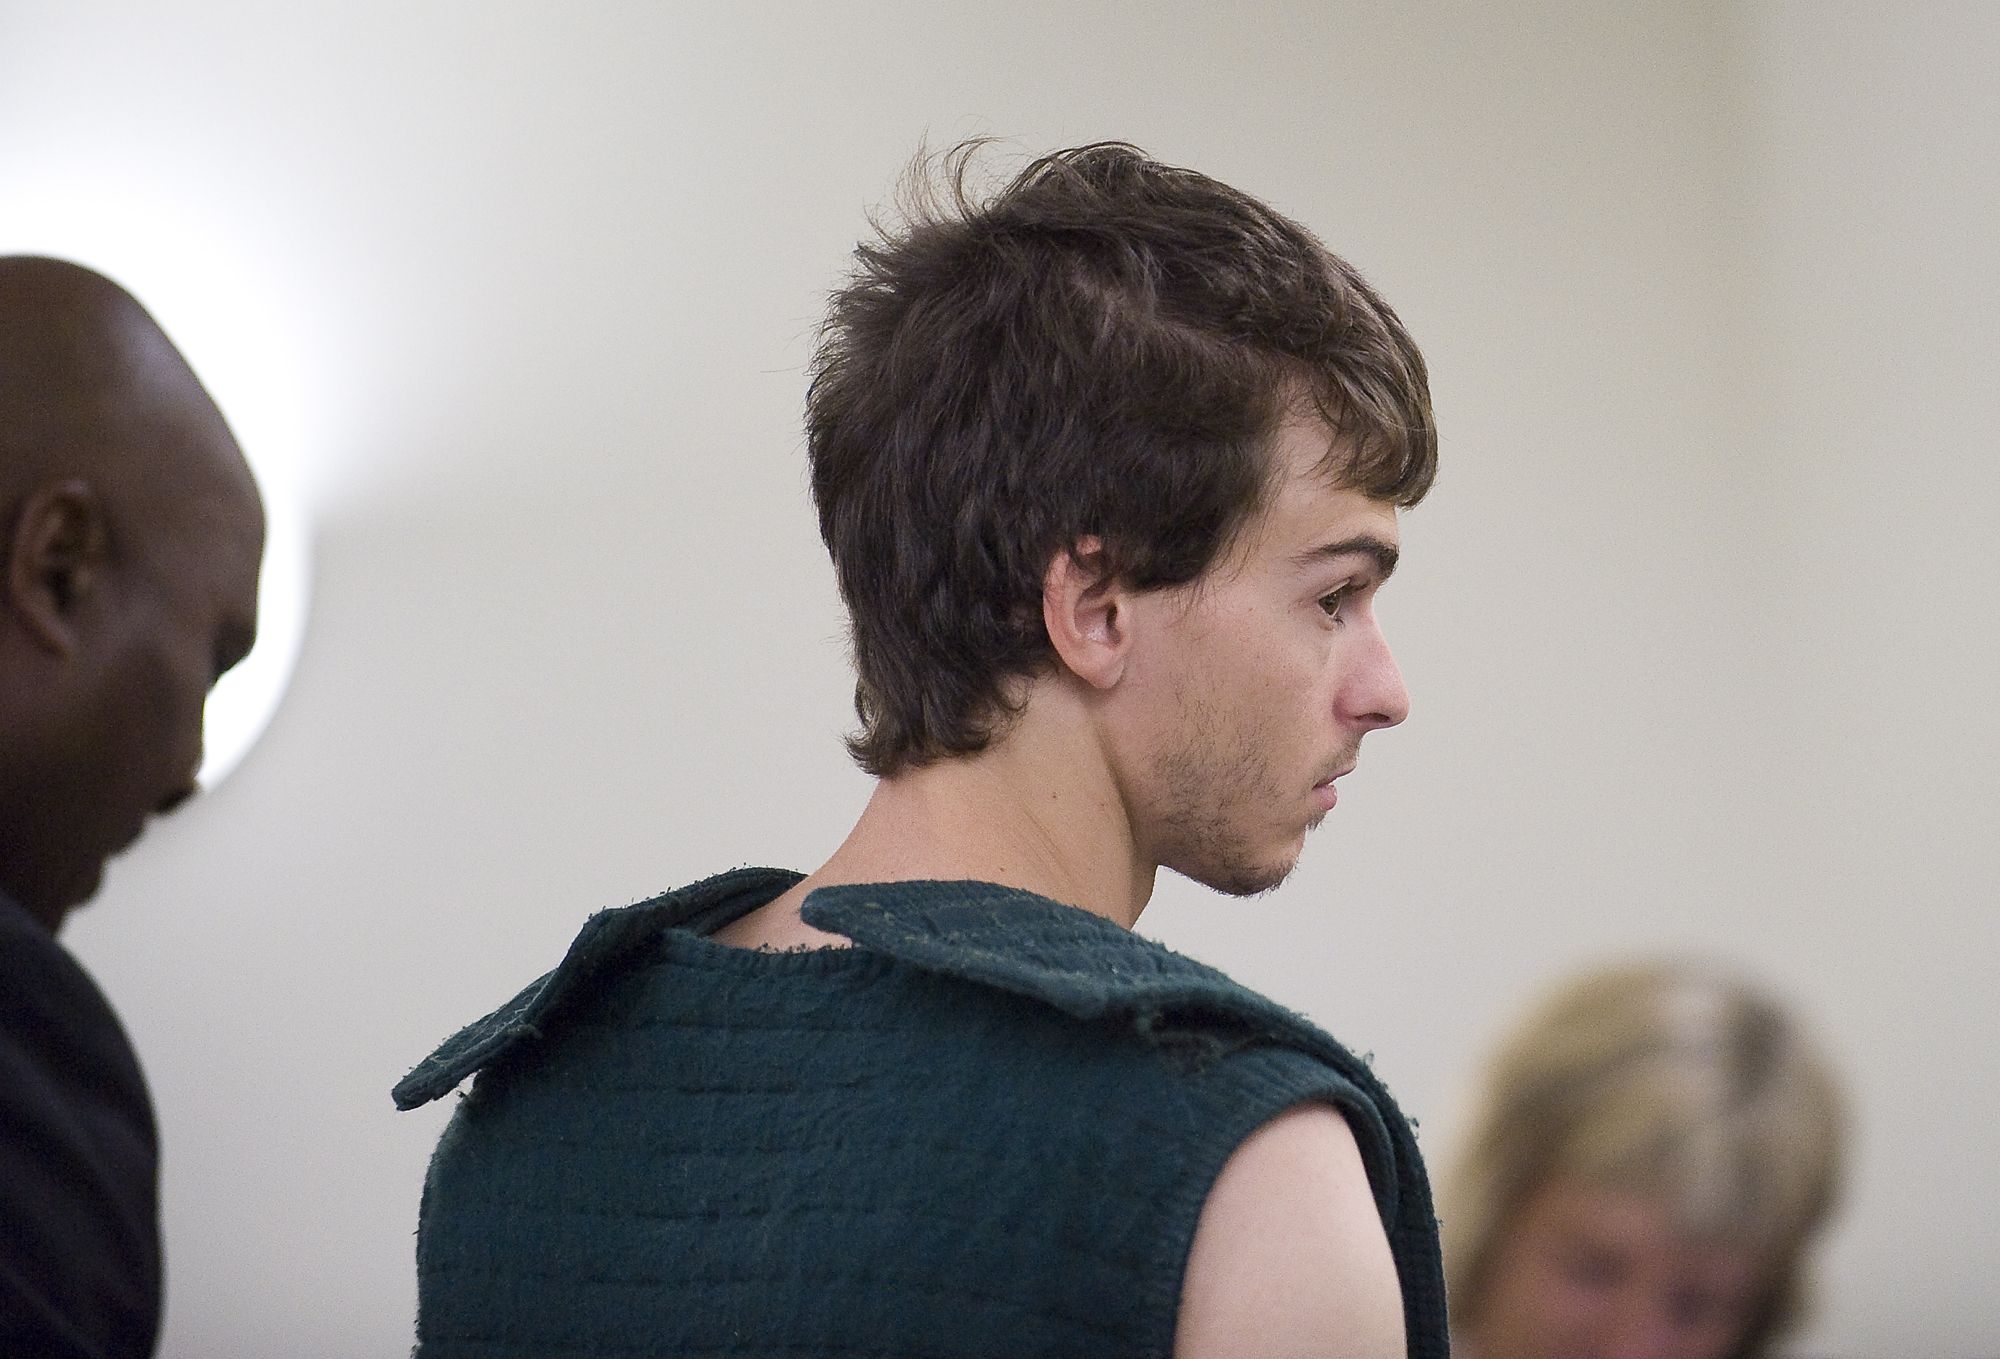 Tyler Peabody pleaded not guilty Friday to vehicular homicide in the traffic death of a 76-year-old Vancouver man.